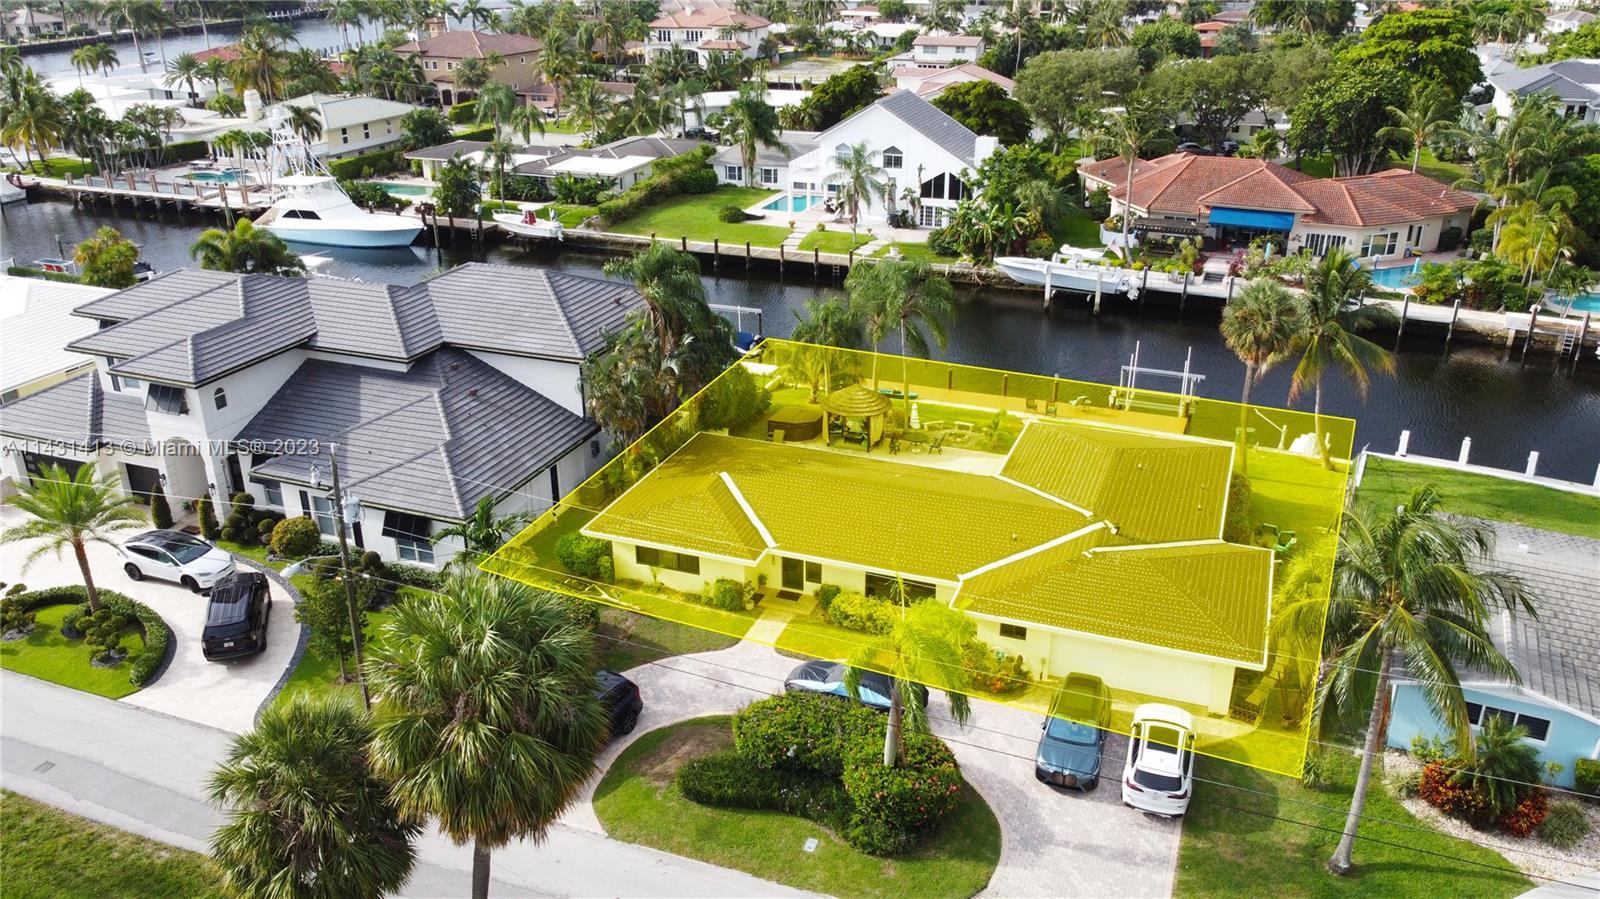 Welcome to this exceptional waterfront home in Pompano Beach, ideally situated in the sought-after H